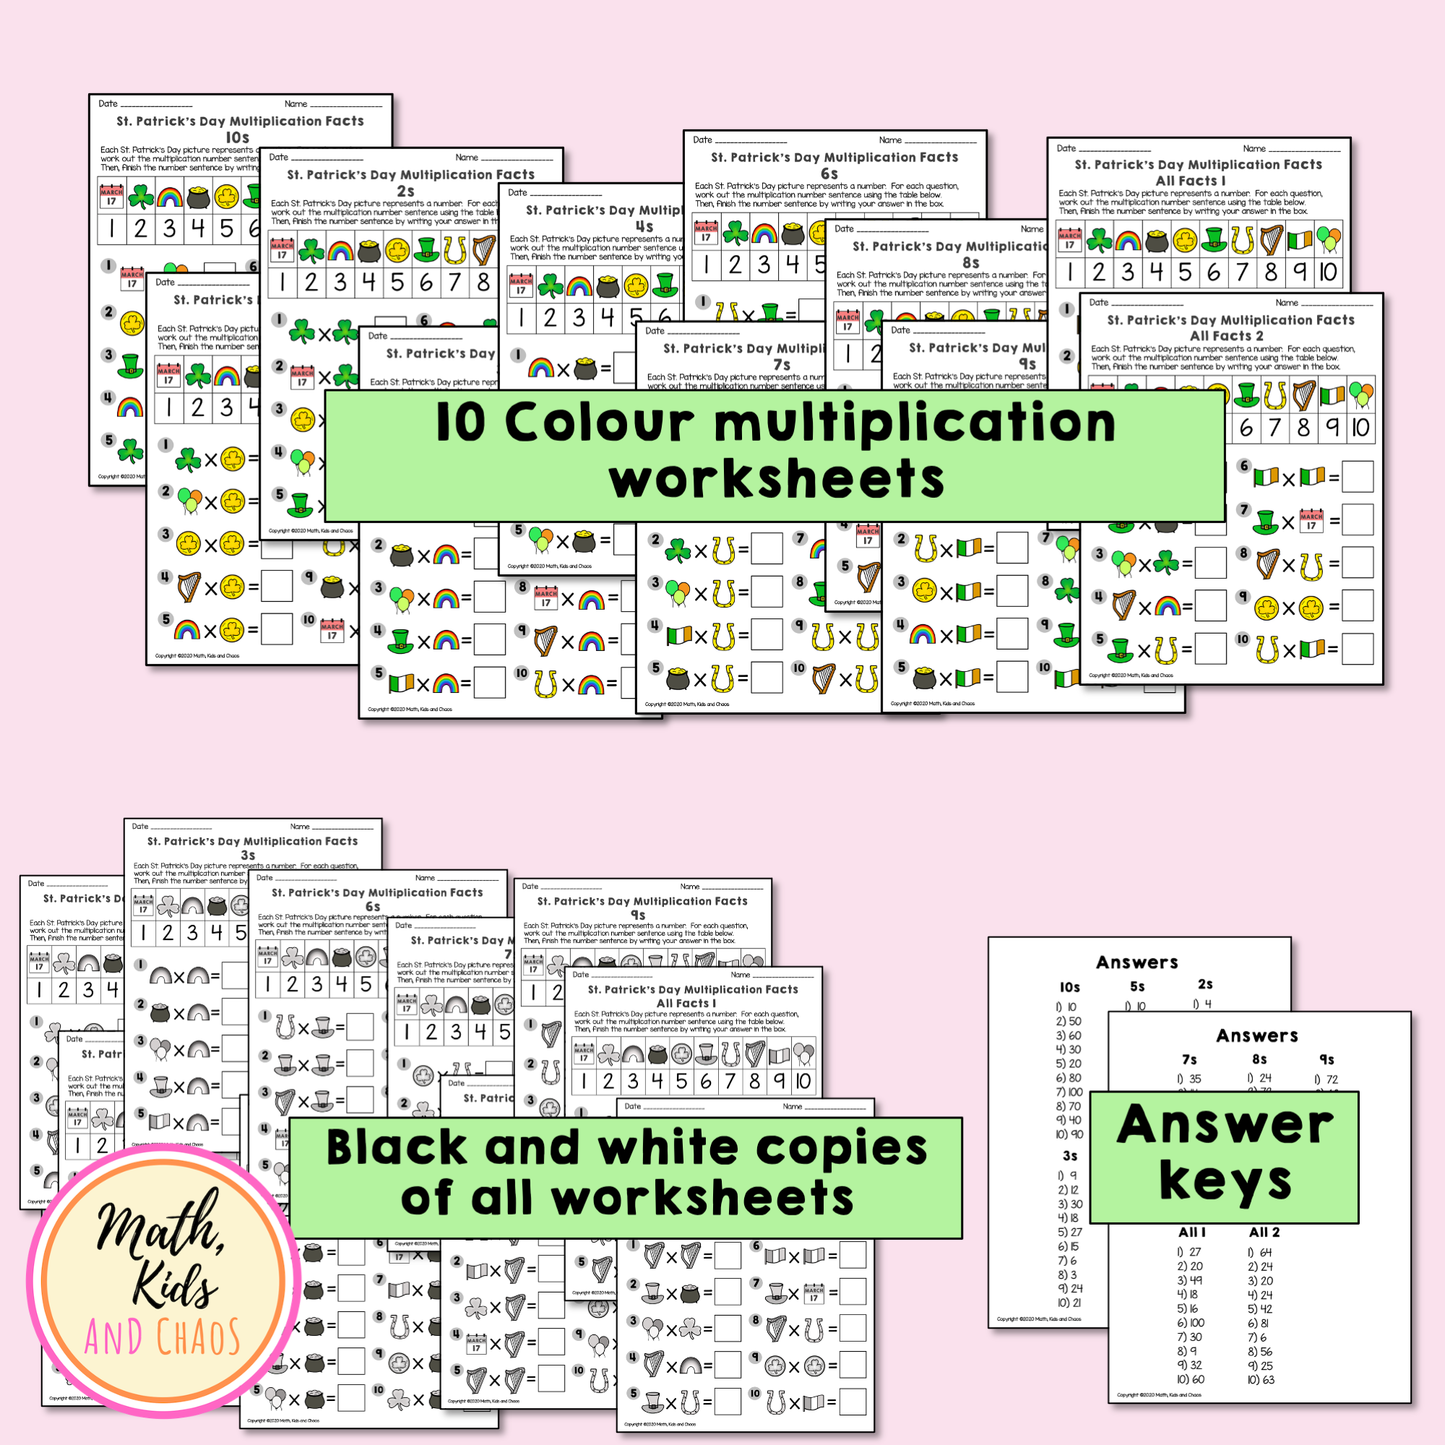 St. Patrick's Day Multiplication Facts Worksheets